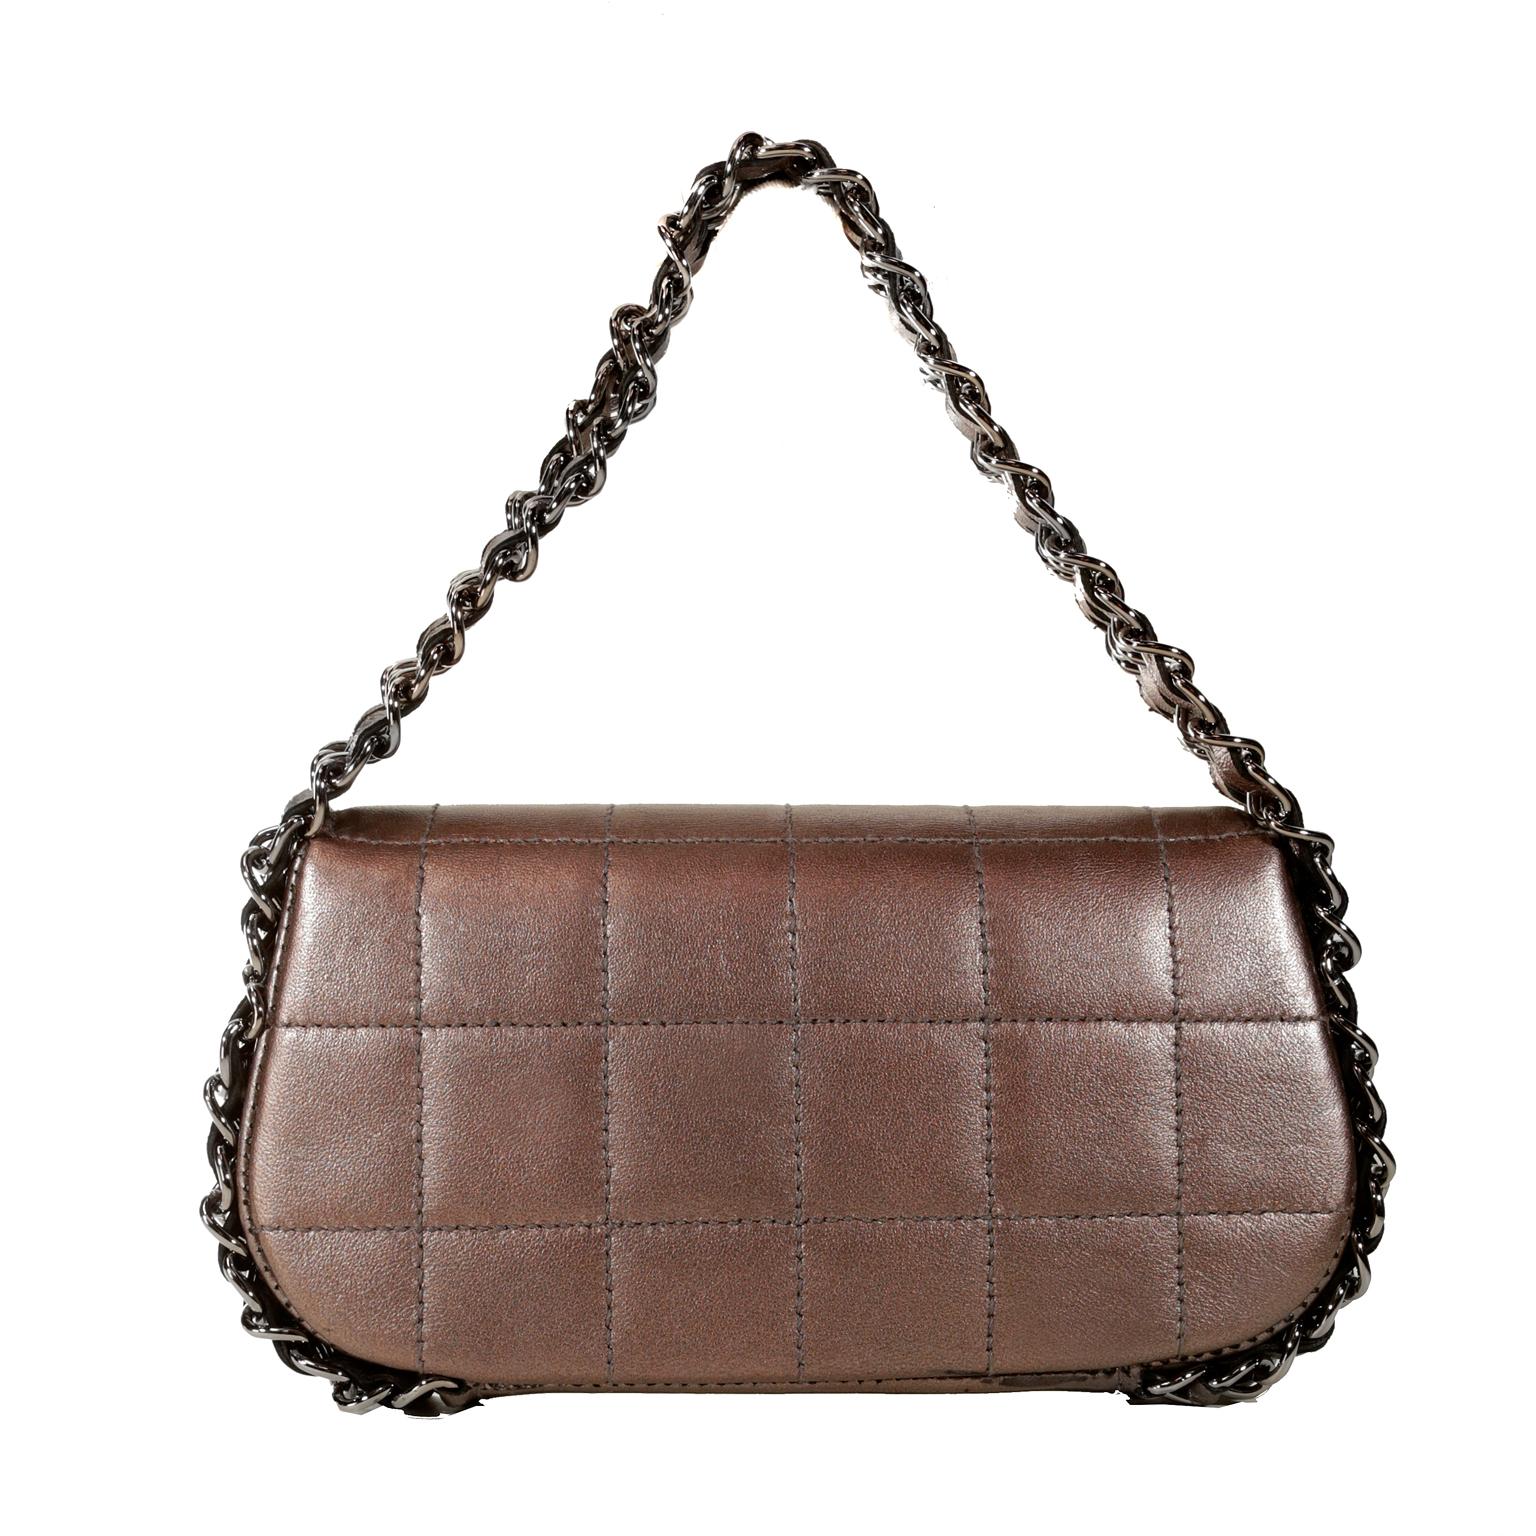 This authentic Chanel Mauve Metallic Leather Triple Chain Small Flap Bag is in beautiful condition. It has enjoyed a previous life and is not perfect. 
 Remarkably neutral mauve leather is stitched in a square pattern and has a subtle metallic